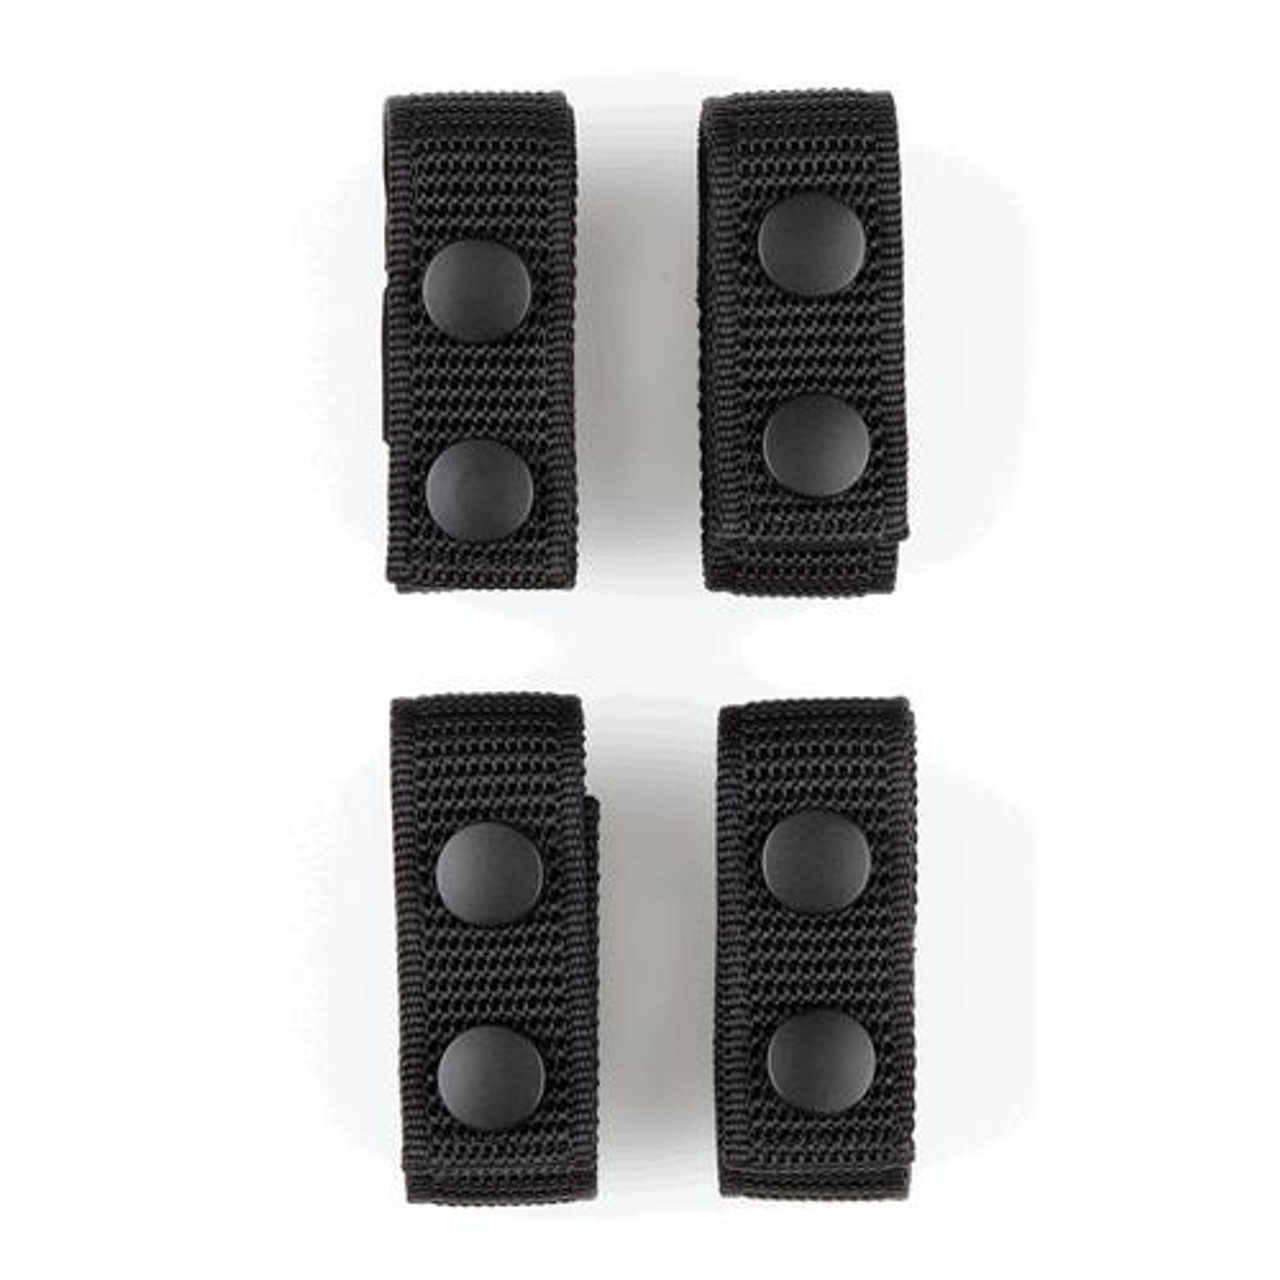 A-TAC™ Nylon 1-Inch Belt Keepers, 4-Pack - 931